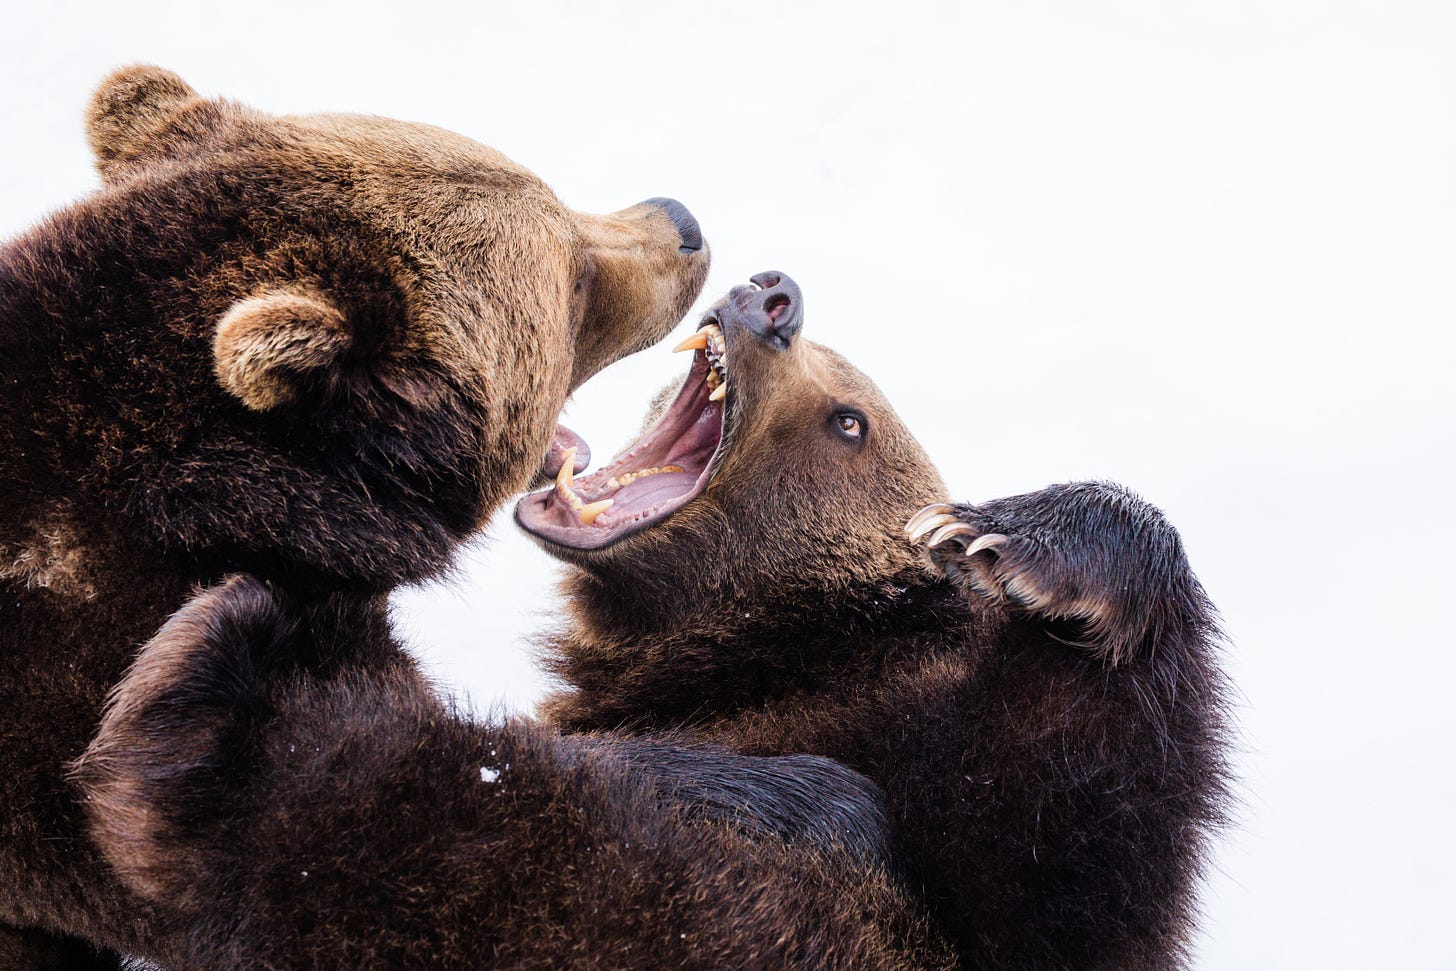 Two bears are fighting with bared teeth.